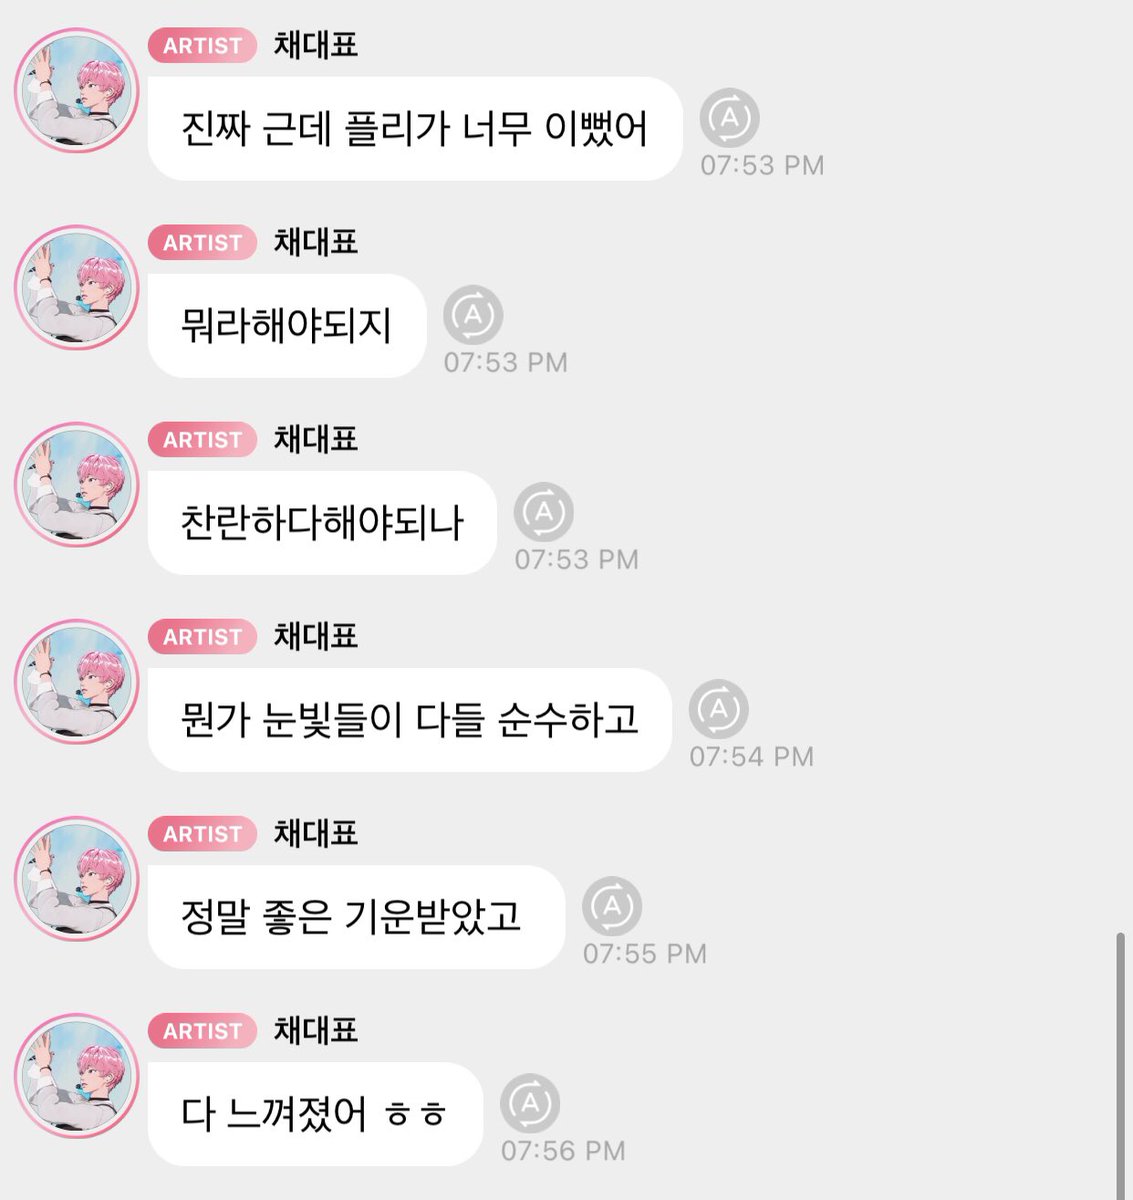 #Plliboba 🦌🫧
💗 🙈
💗 🙉
💗 so vigorous 🥰
💗 I was so happy💗
💗 Yejunie hyung crybaby~
💗 but for real, Pllis were so pretty
💗 how should I call it
💗 should I say 'brilliant'?
💗 like your eyes are so pure
💗 I got lots of great energy (from you)
💗 I felt it all hehe